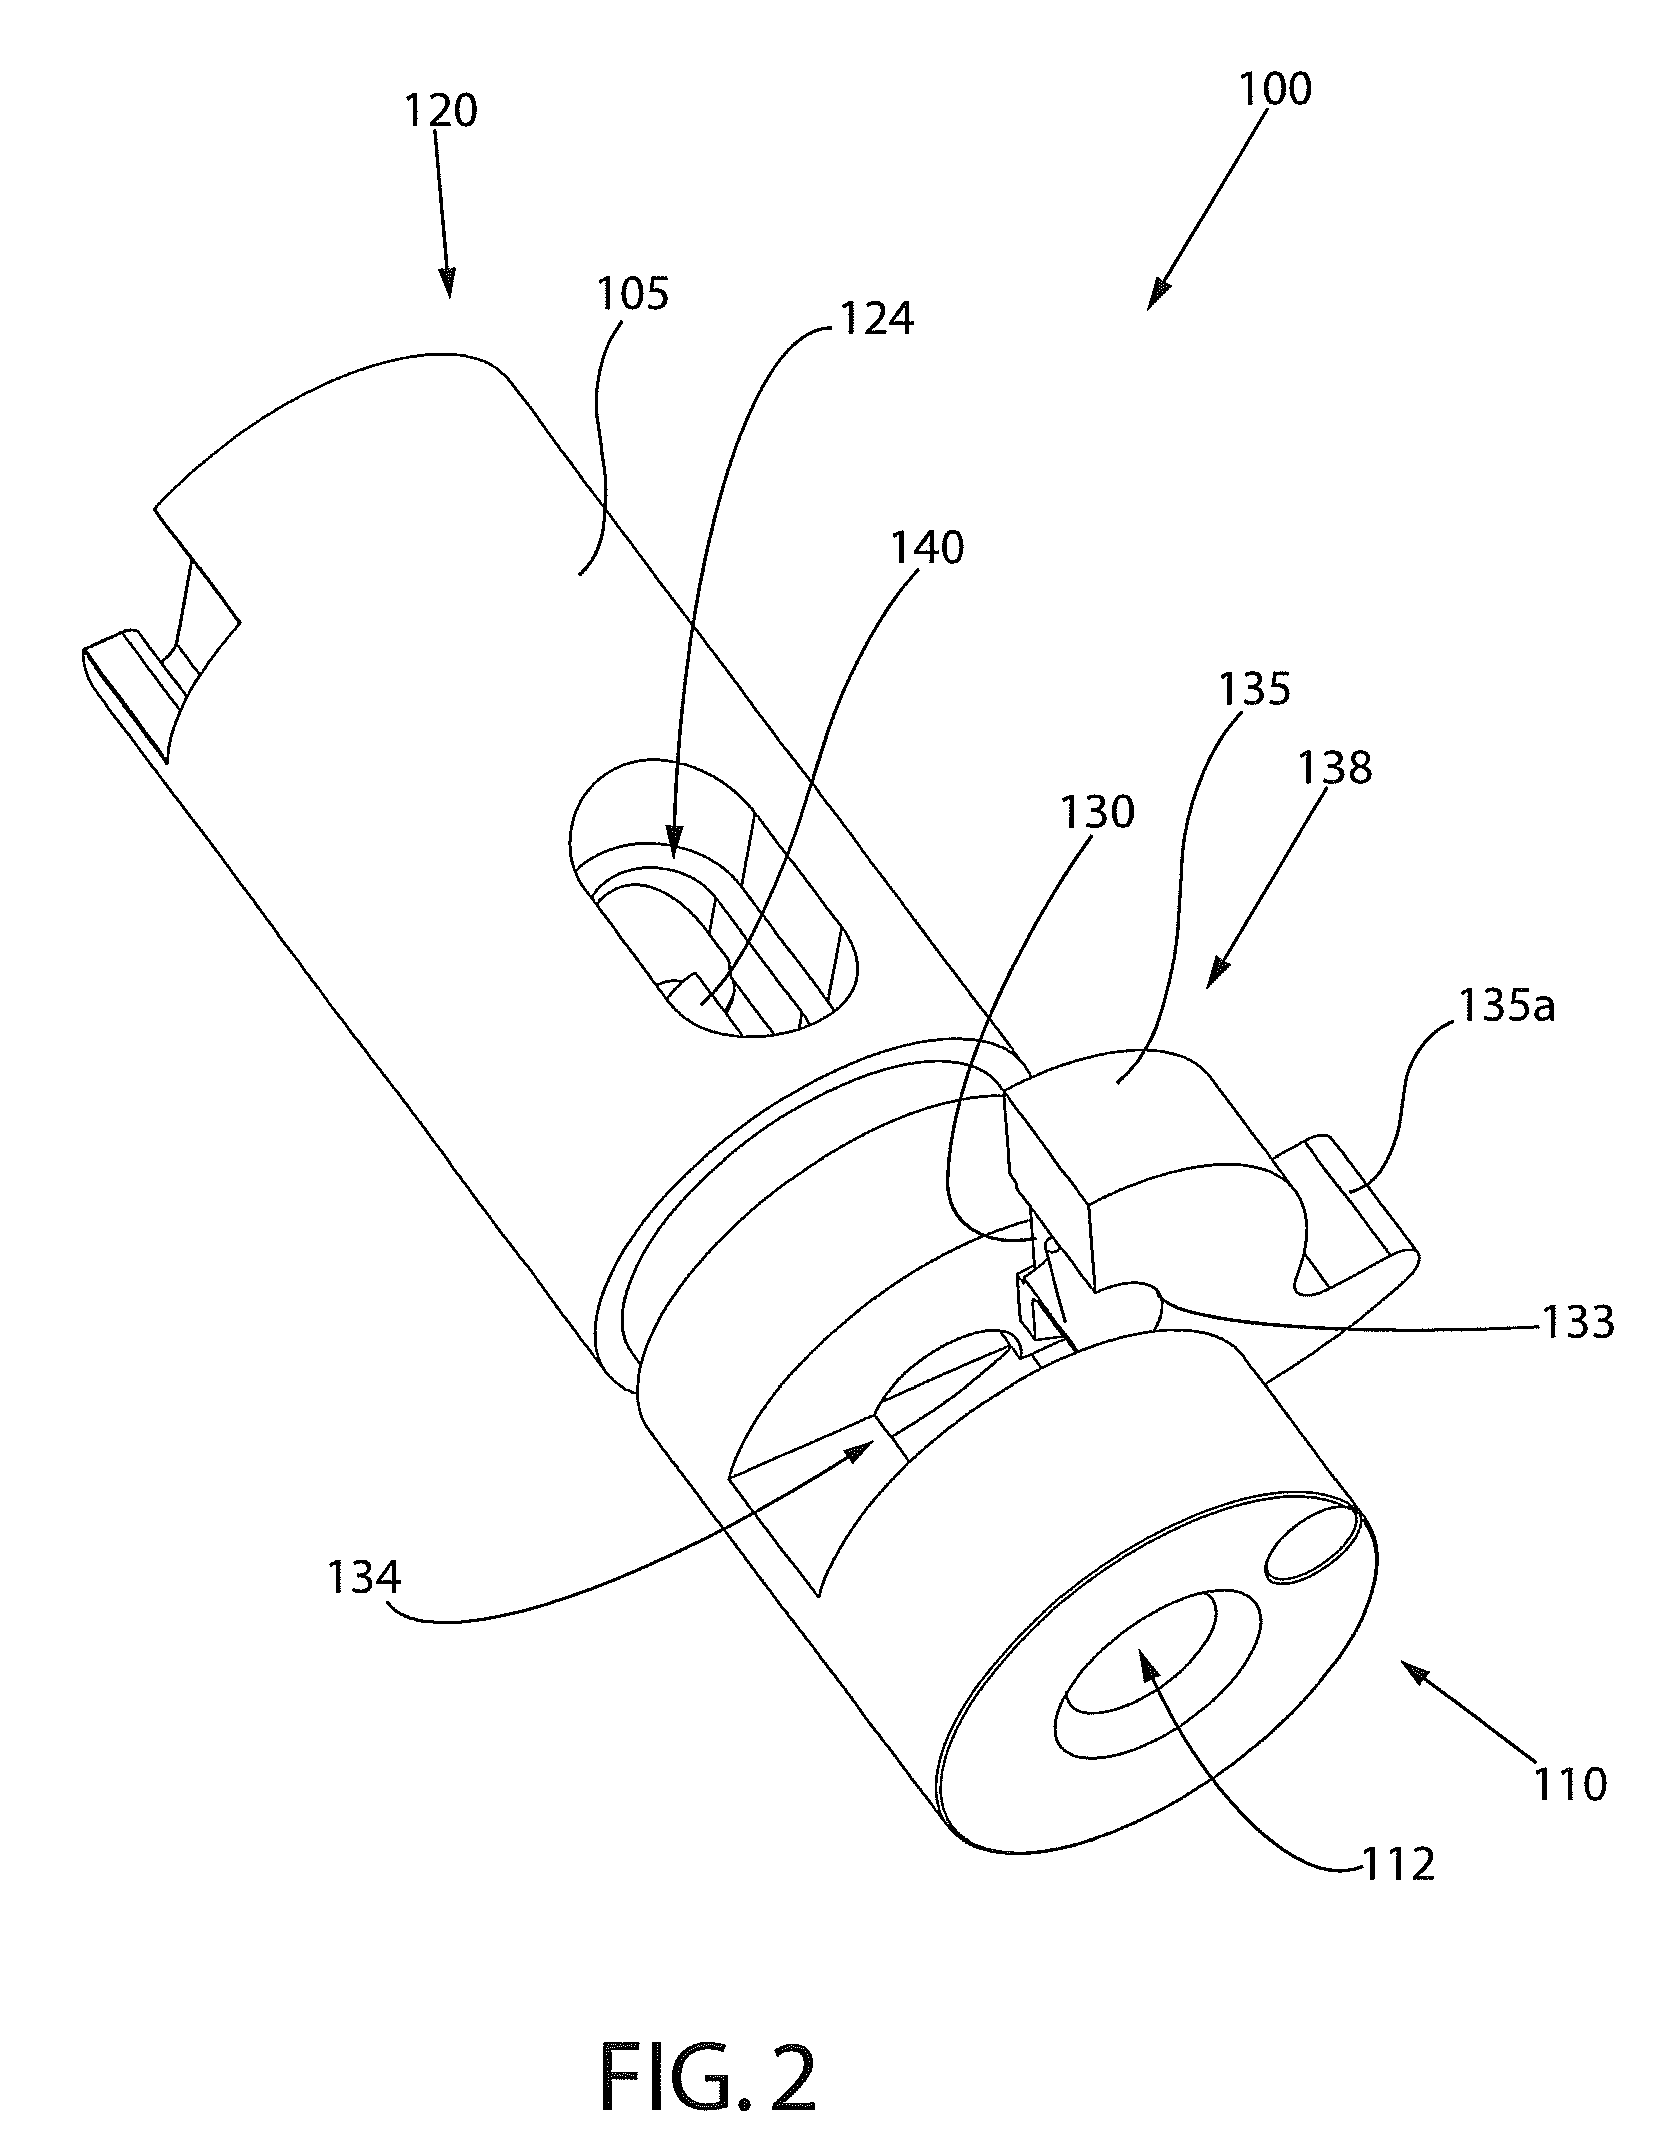 Coaxial cable preparation tool and method of use thereof